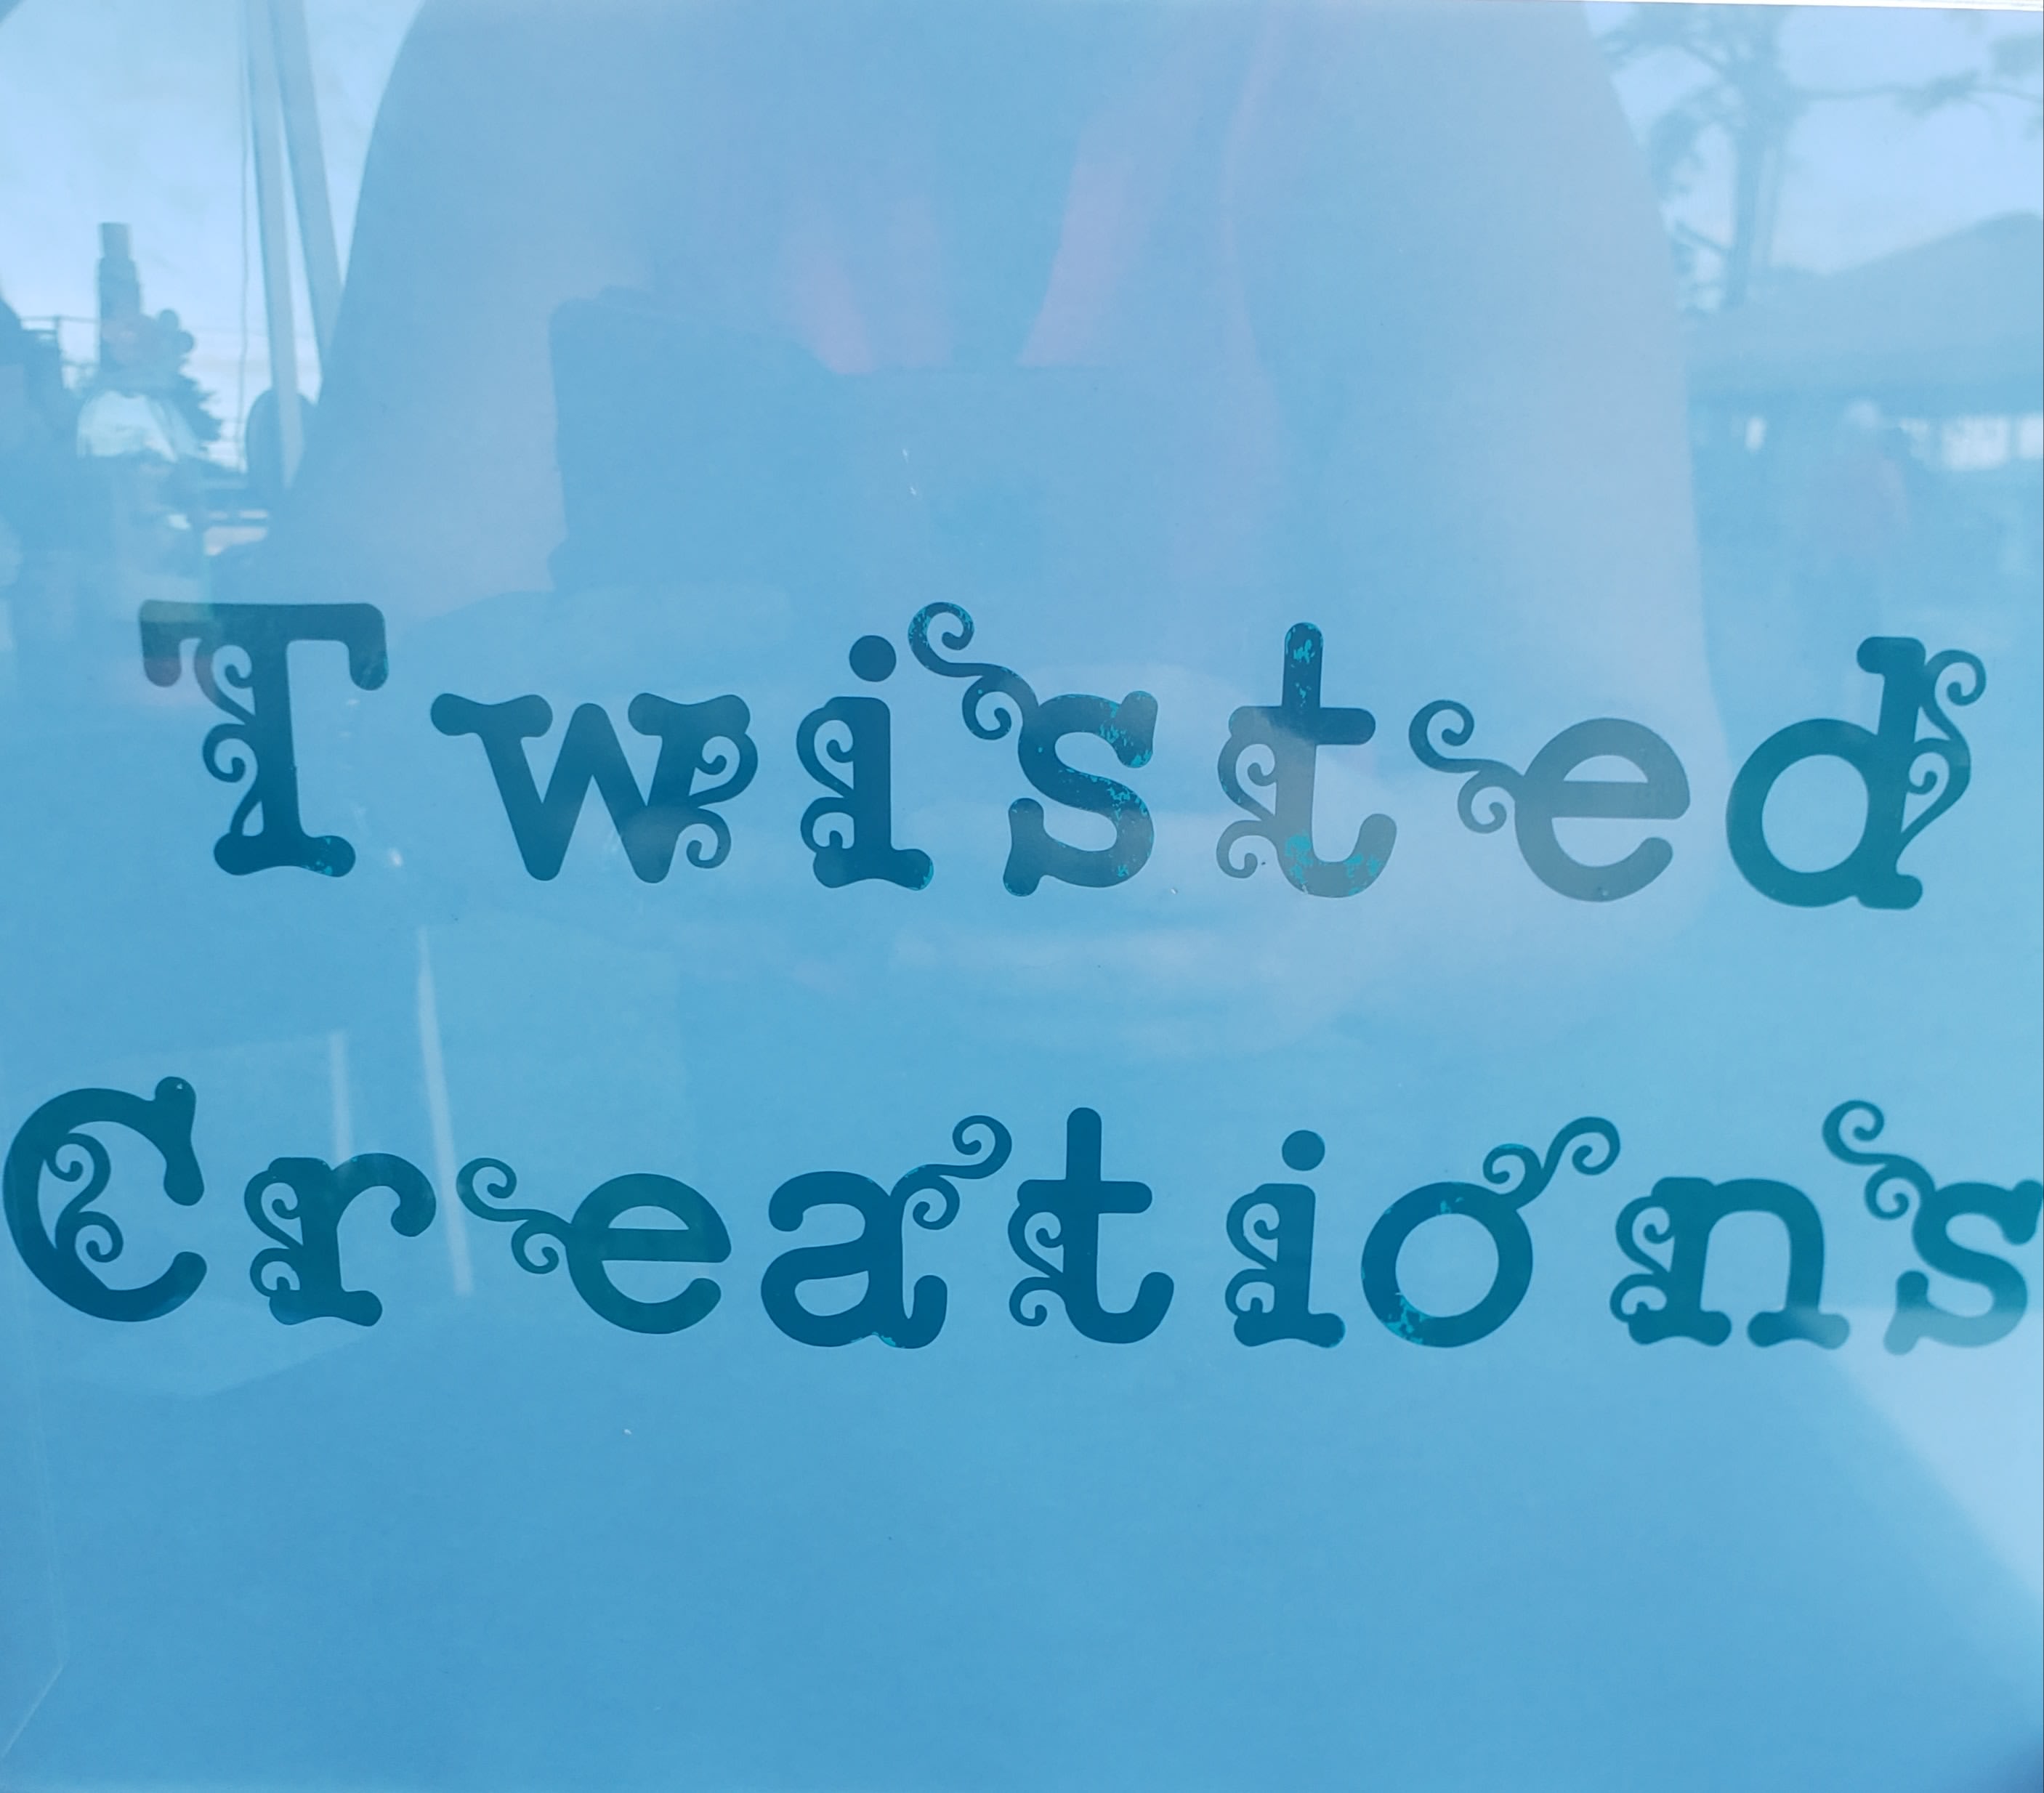 Twisted Creations